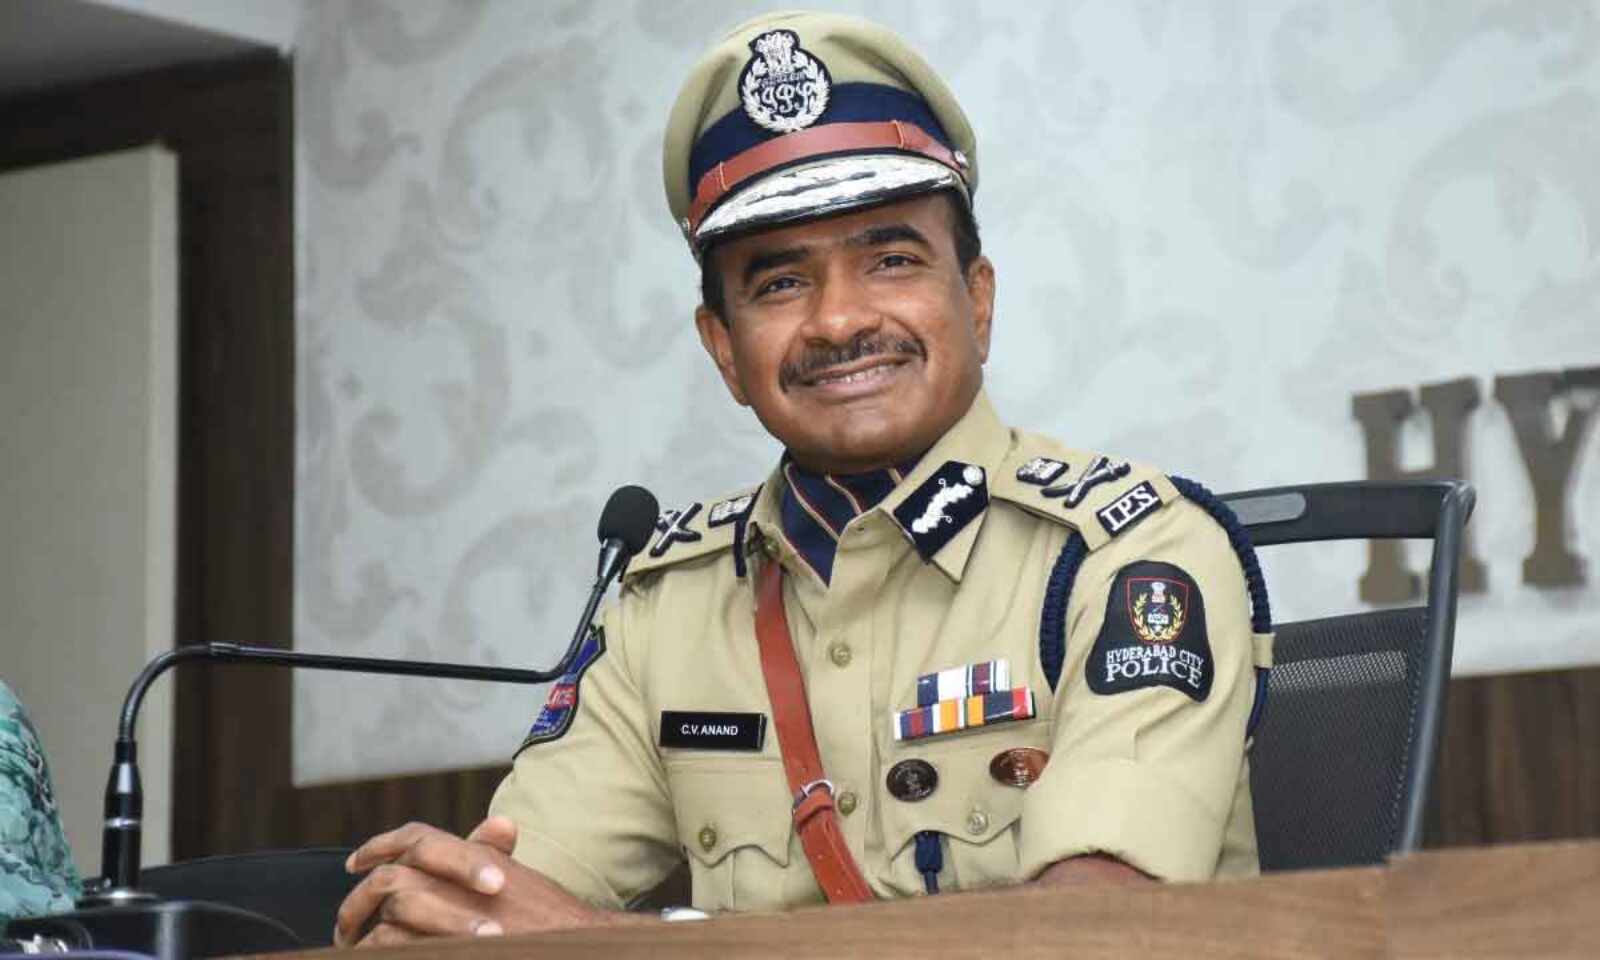 Women should go and claim their due: Hyderabad CP CV Anand